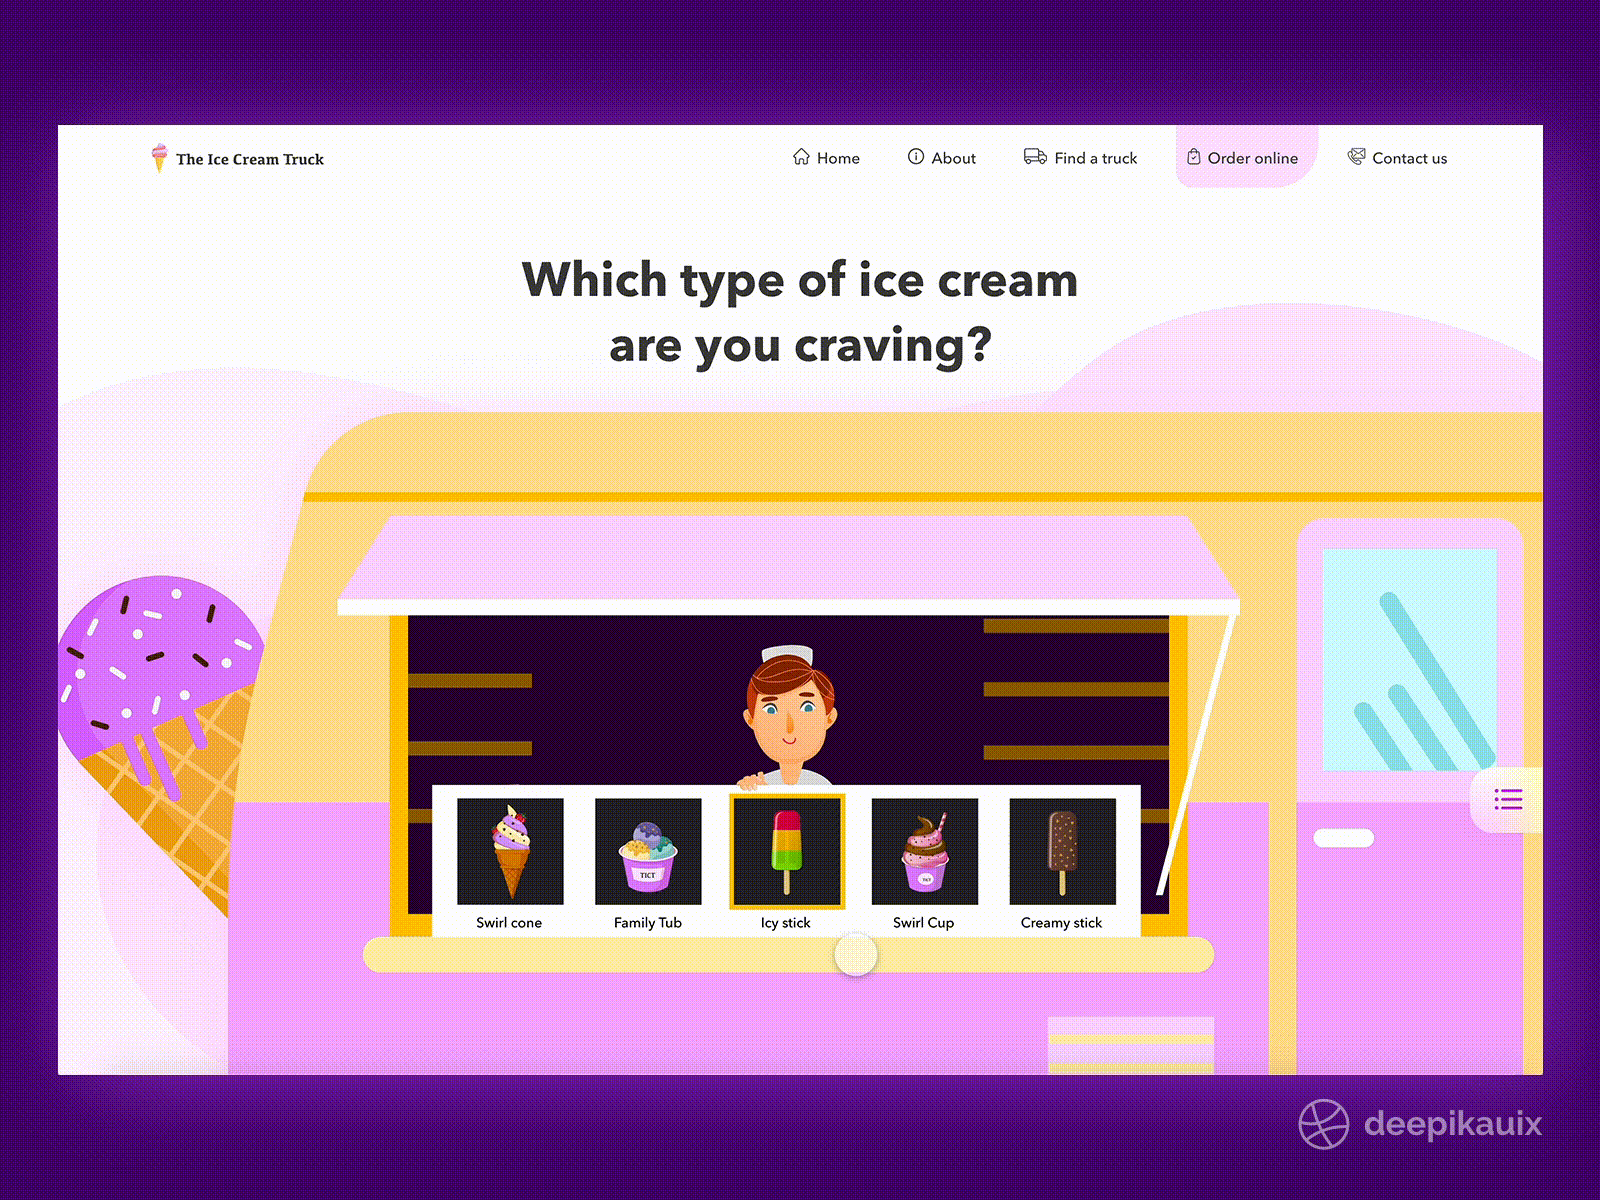 The Icecream Truck - Web design adobe xd animation checkout dailyui design flat ui food delivery ice cream illustrations interaction microinteraction minimal modern motion graphics order ui ux vector art web design website